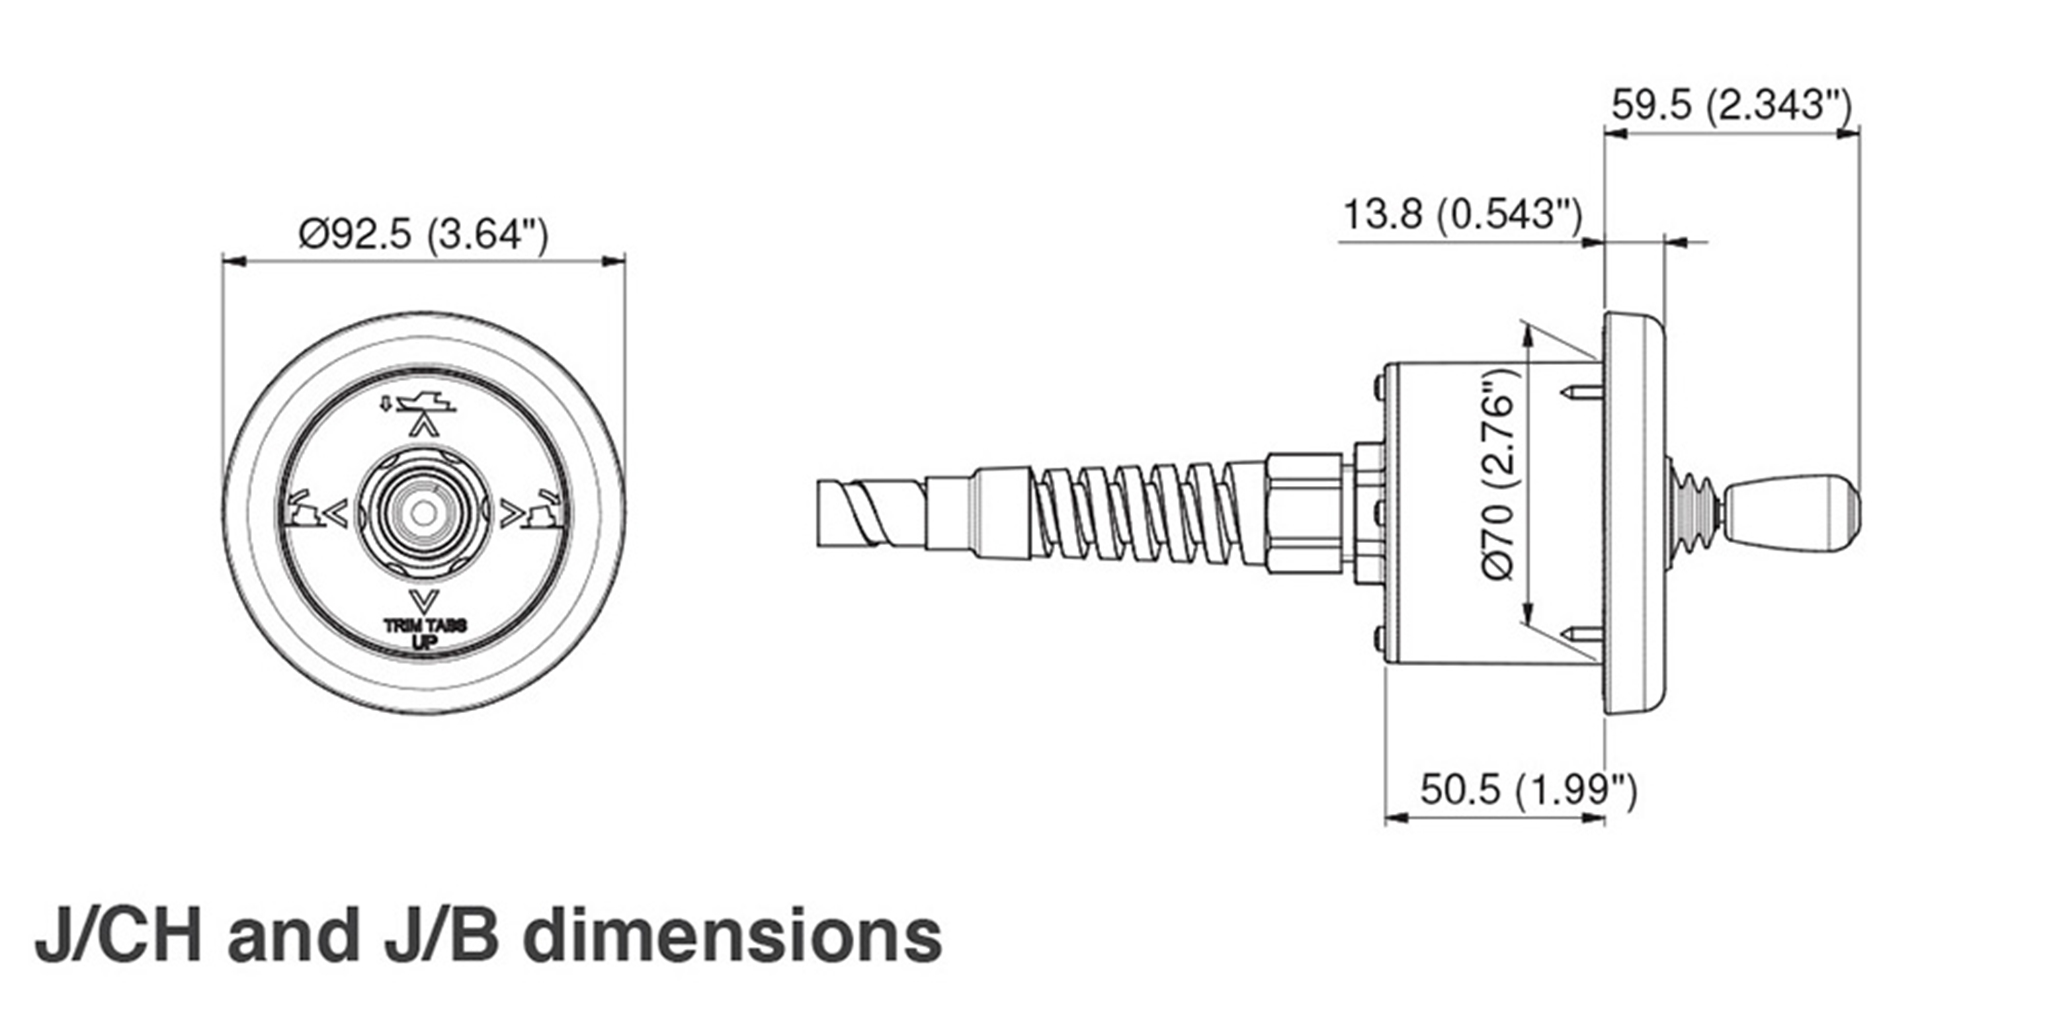 J/CH-2 2nd Station Round Joystick Controller Specifications